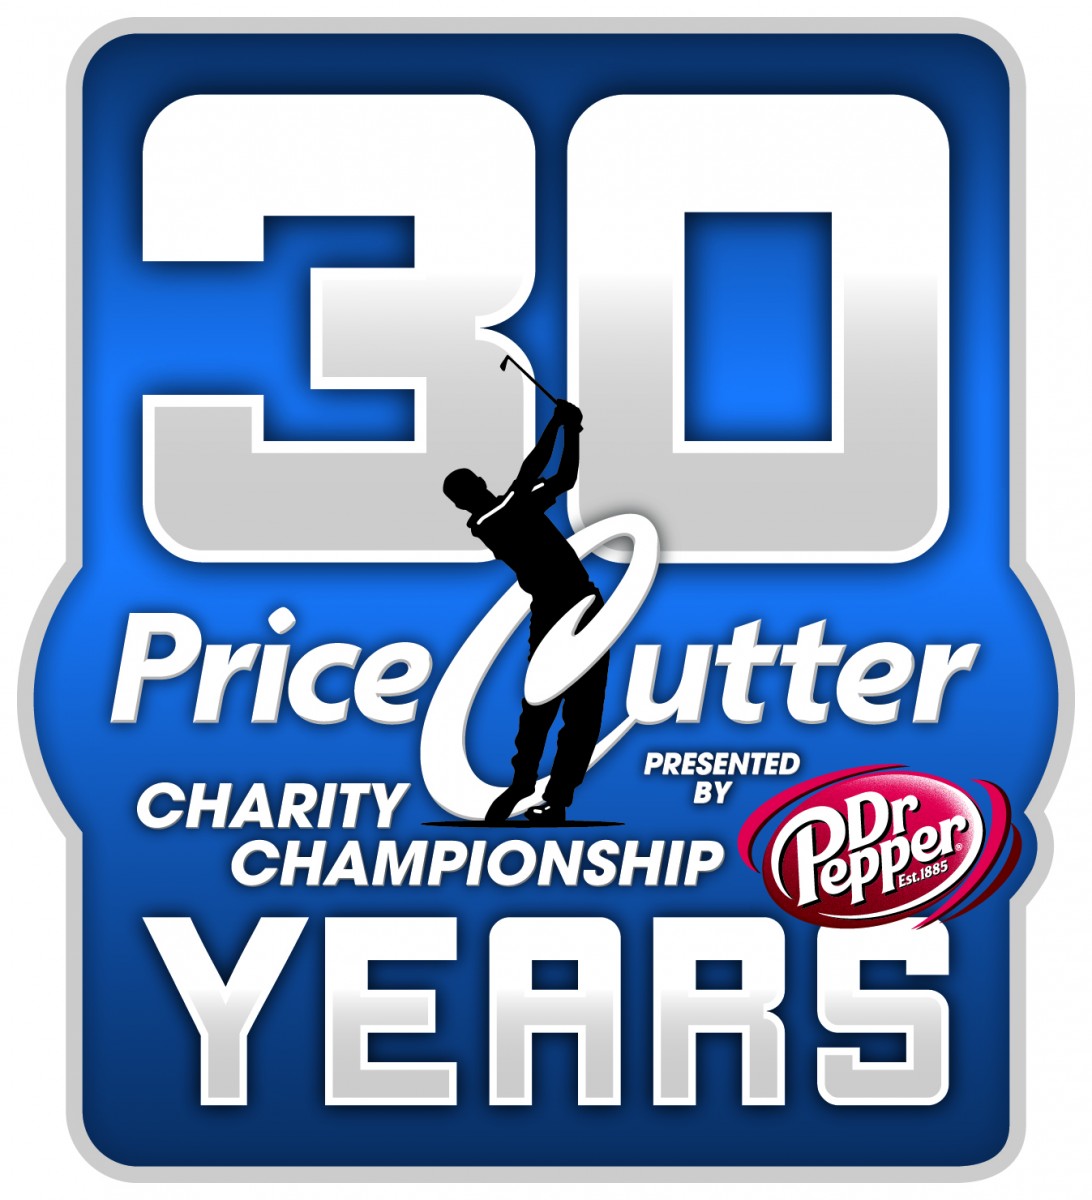 Price Cutter Charity Championship presented by Dr Pepper